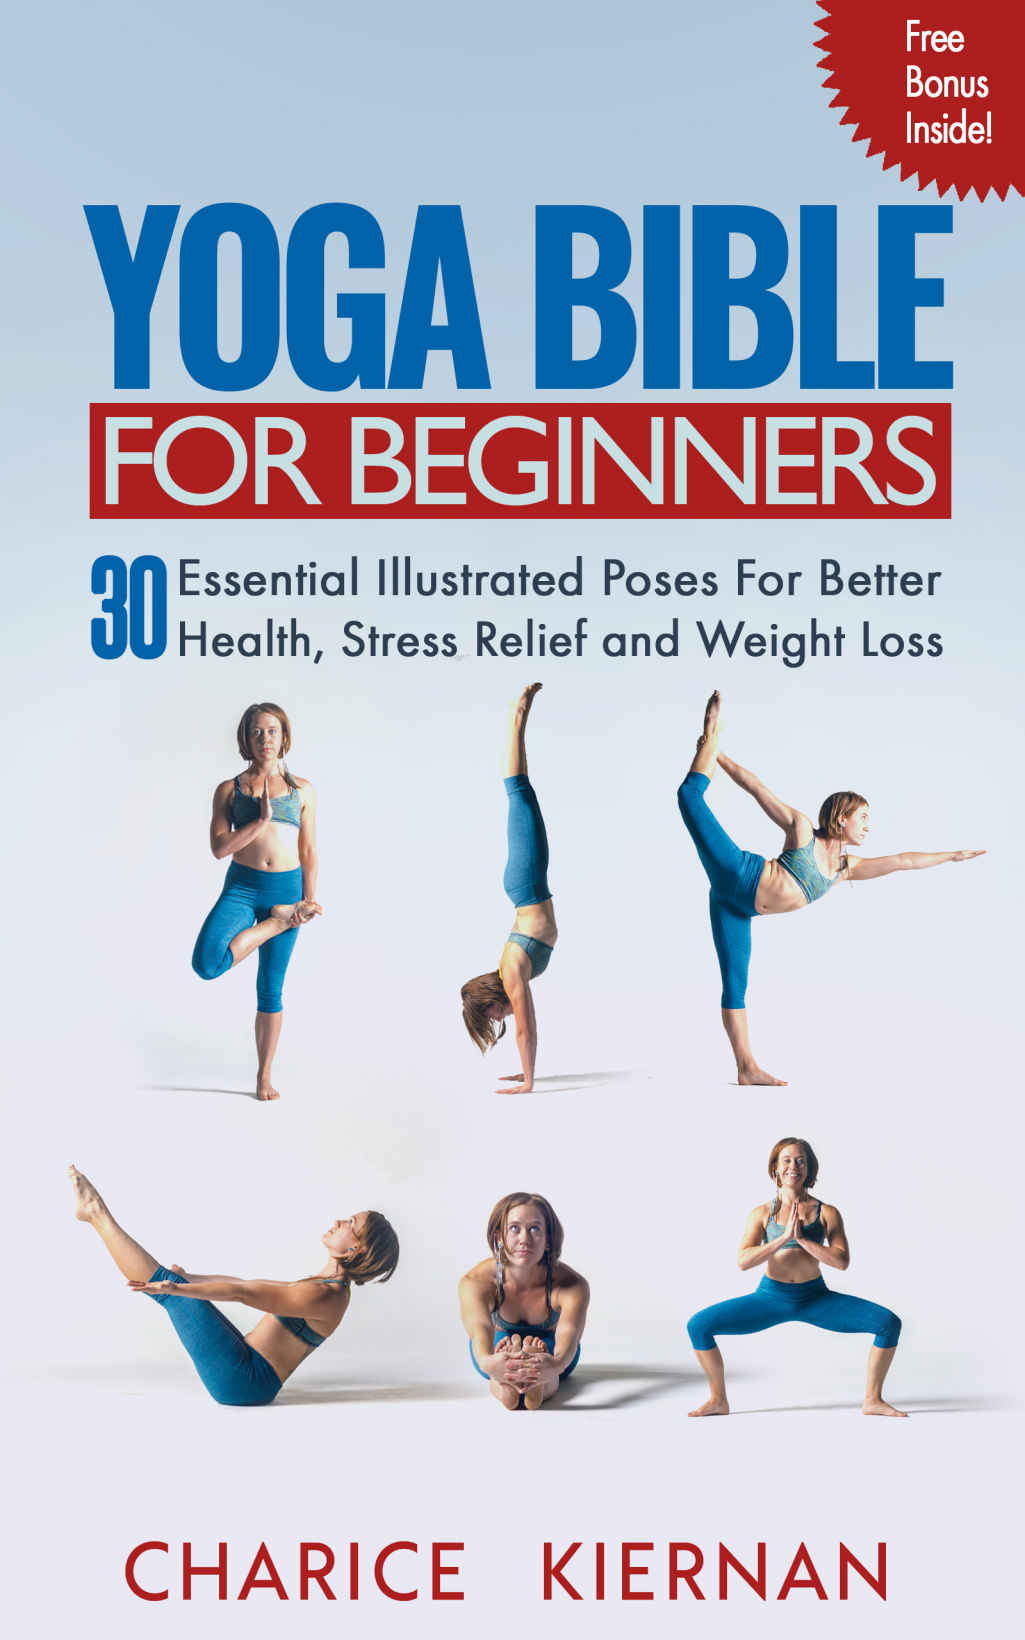 The Yoga Bible For Beginners 30 Essential Illustrated Poses For Better Health, Stress Relief and Weight Loss